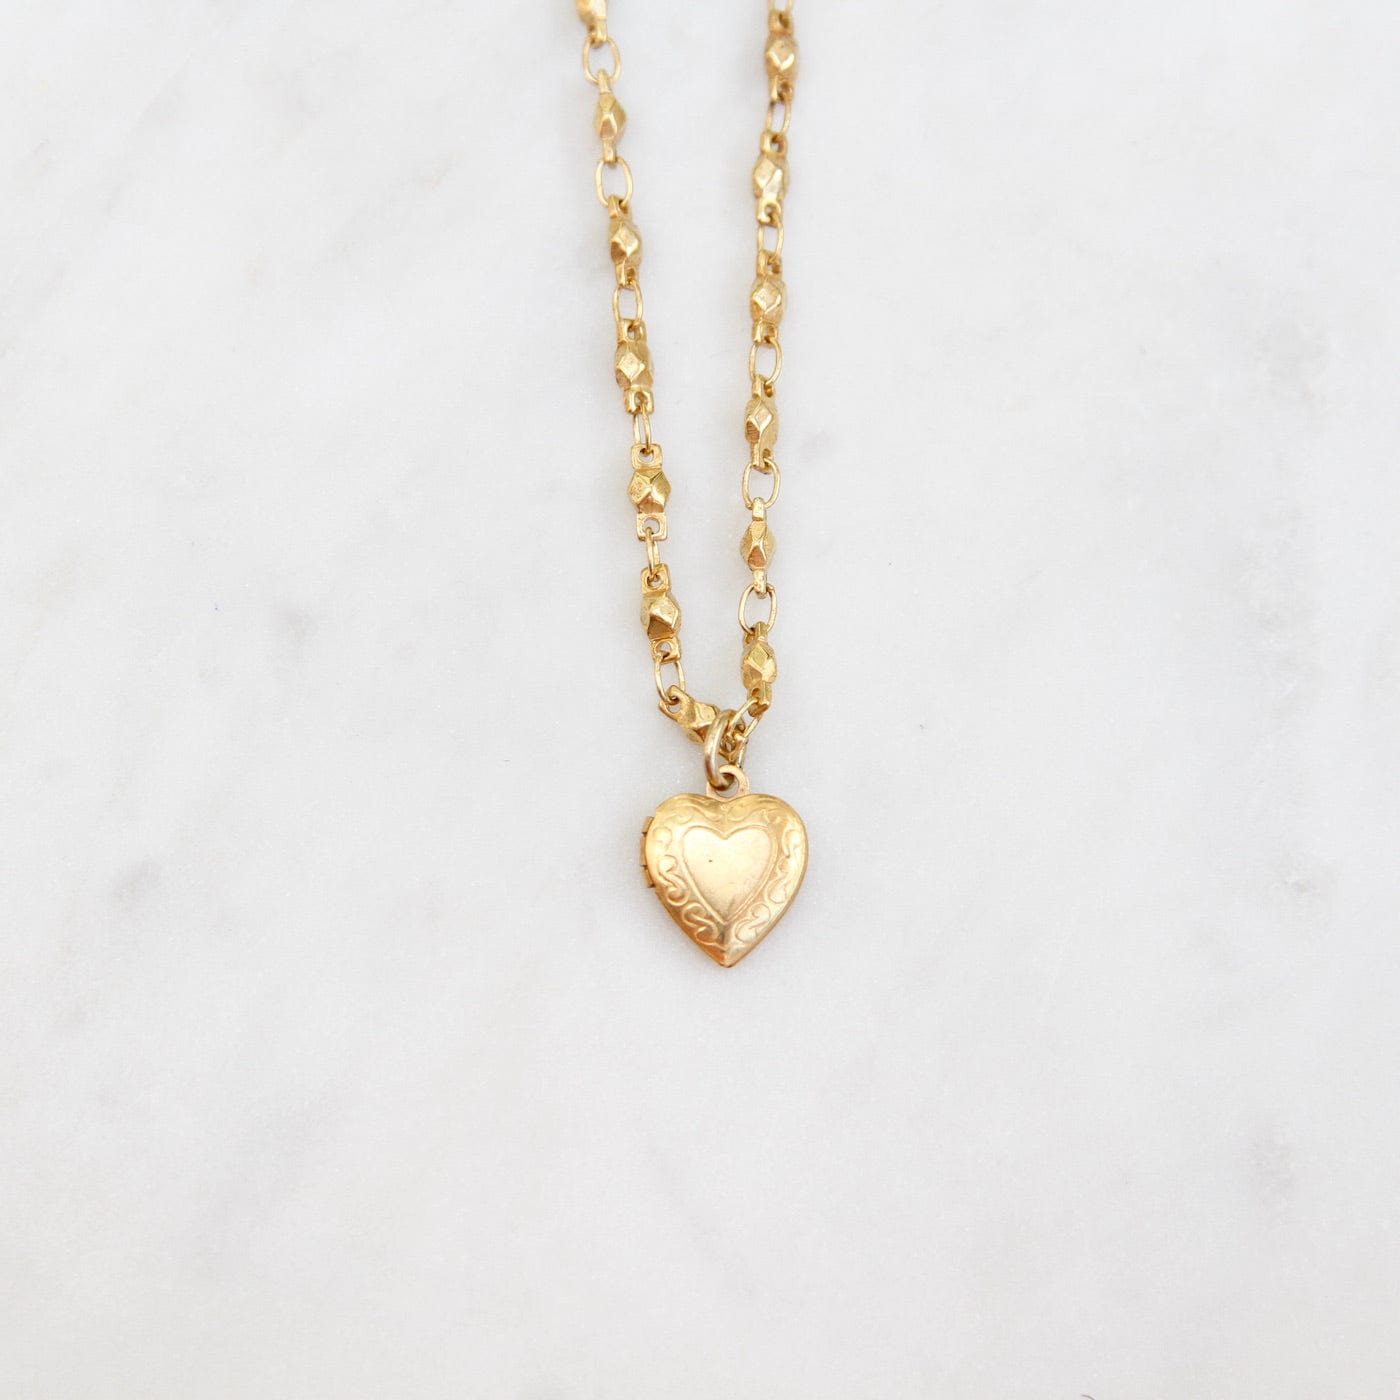 NKL-JM Small Heart Locket on Bead Link Chain - Gold Plate